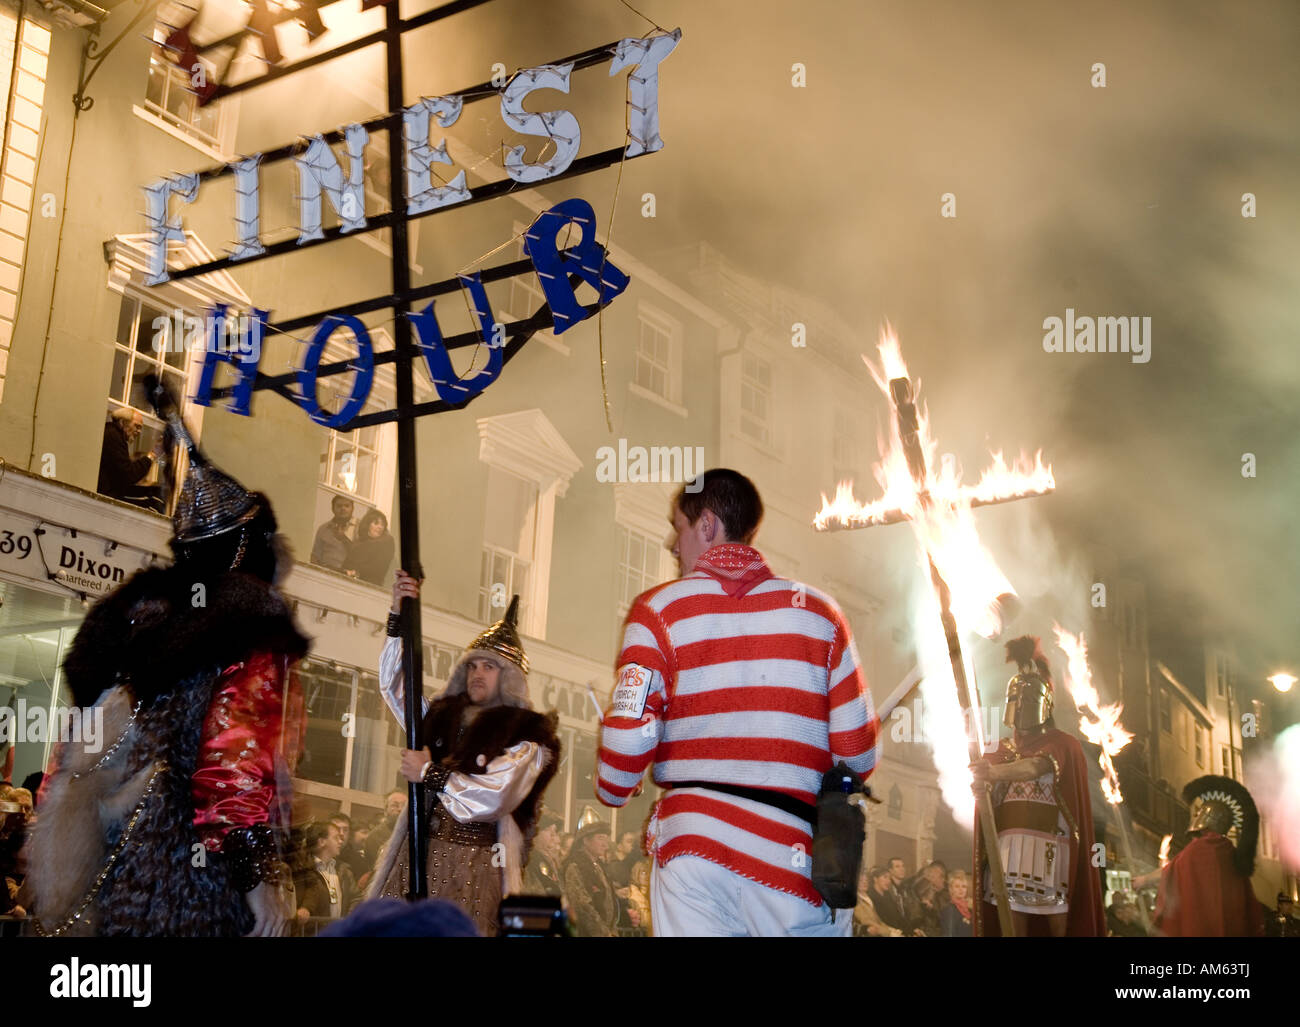 Banners And Burning Cross At the Lewes Fire Festival Sussex UK Europe Stock Photo